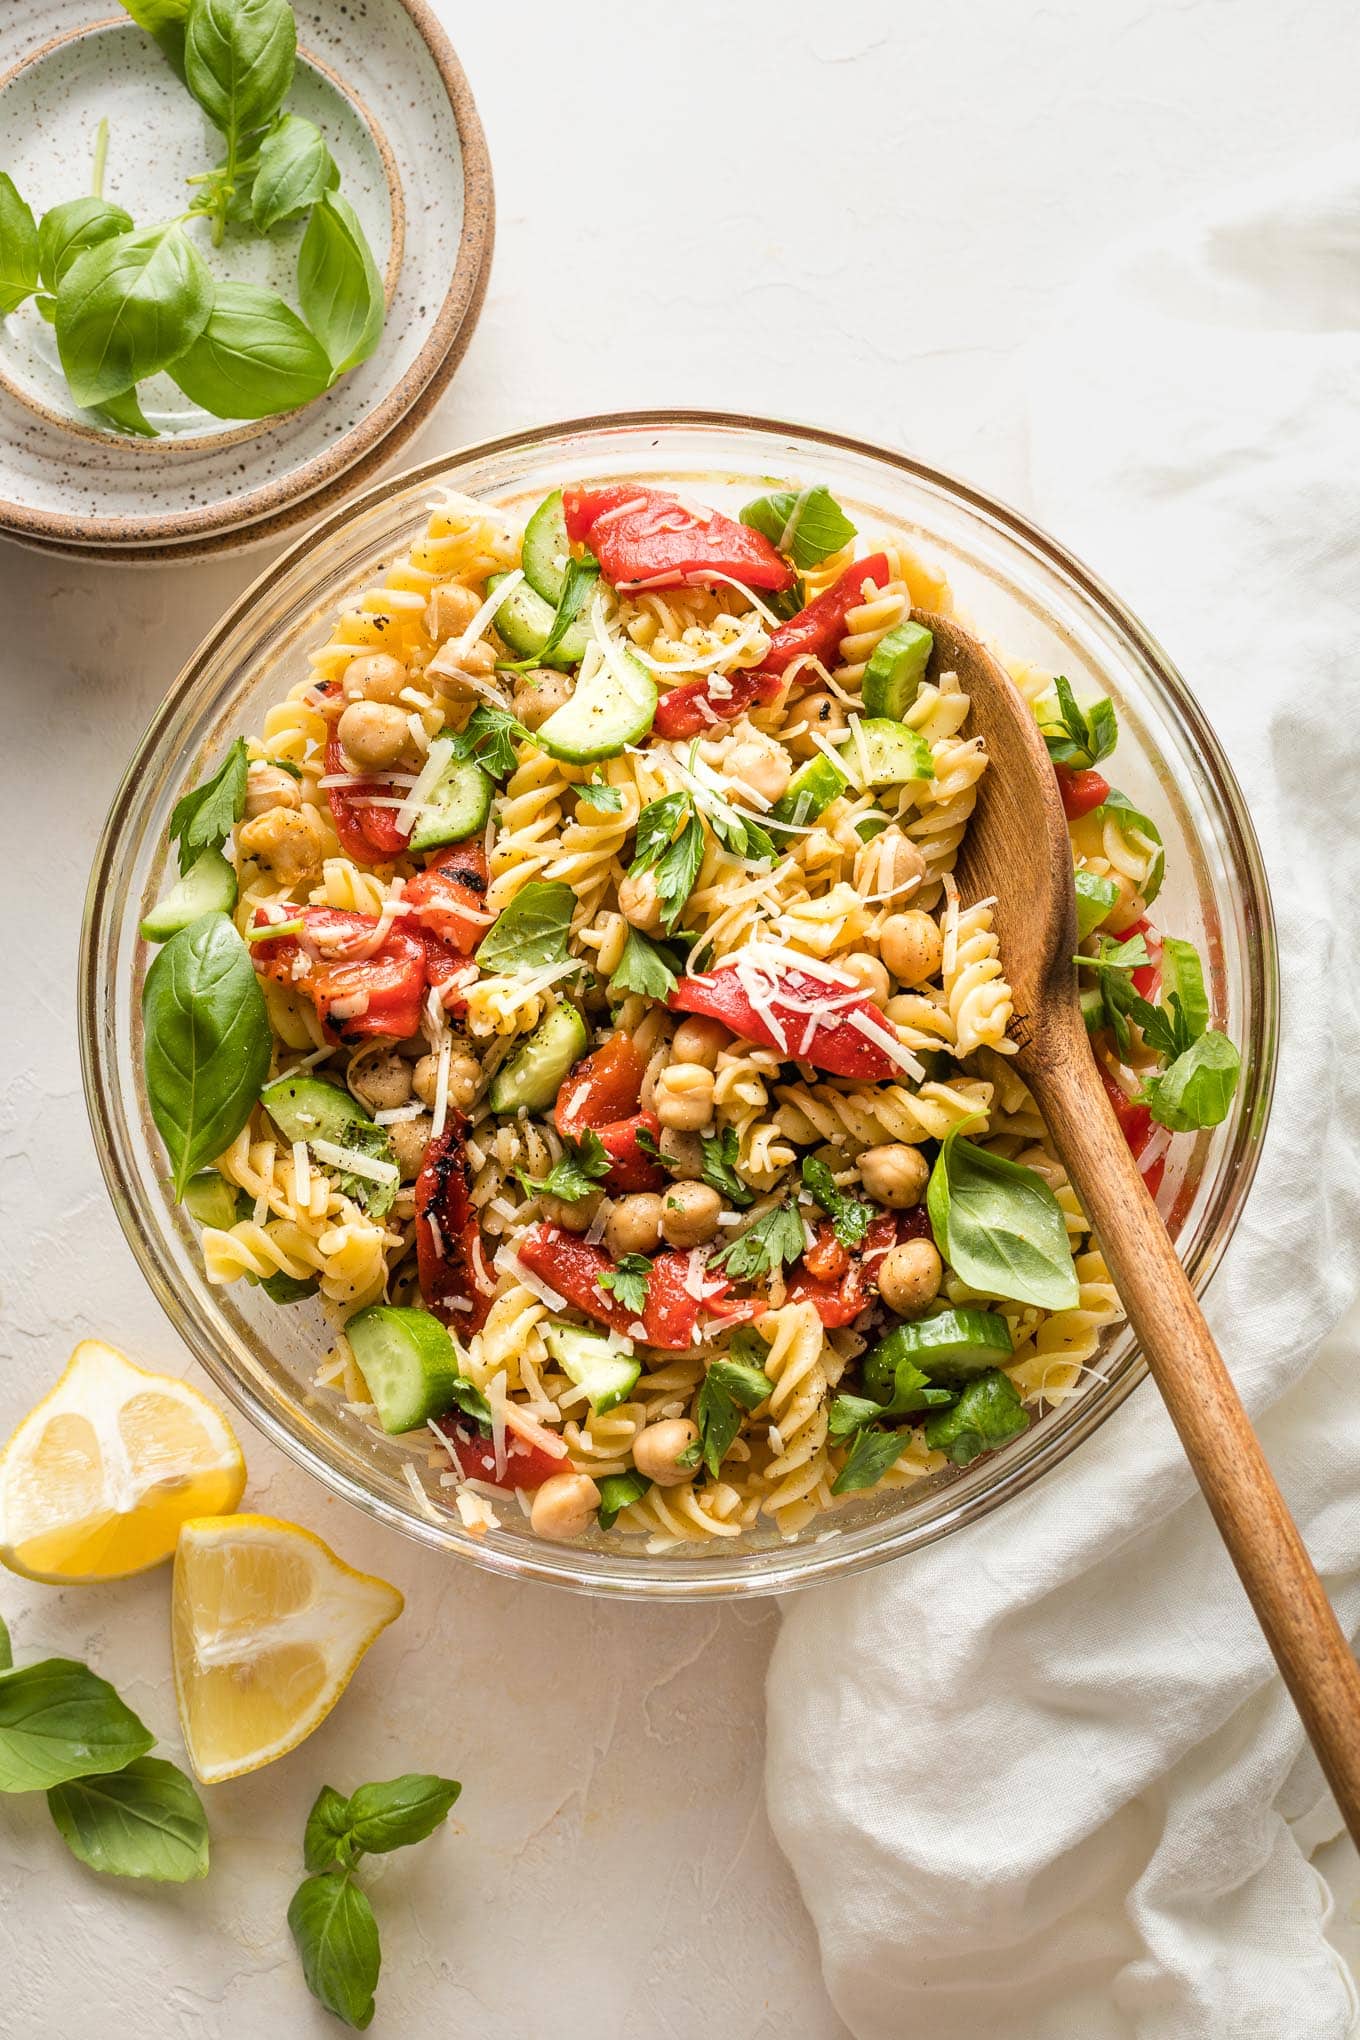 https://www.nourish-and-fete.com/wp-content/uploads/2021/07/pasta-salad-with-chickpeas-6.jpg